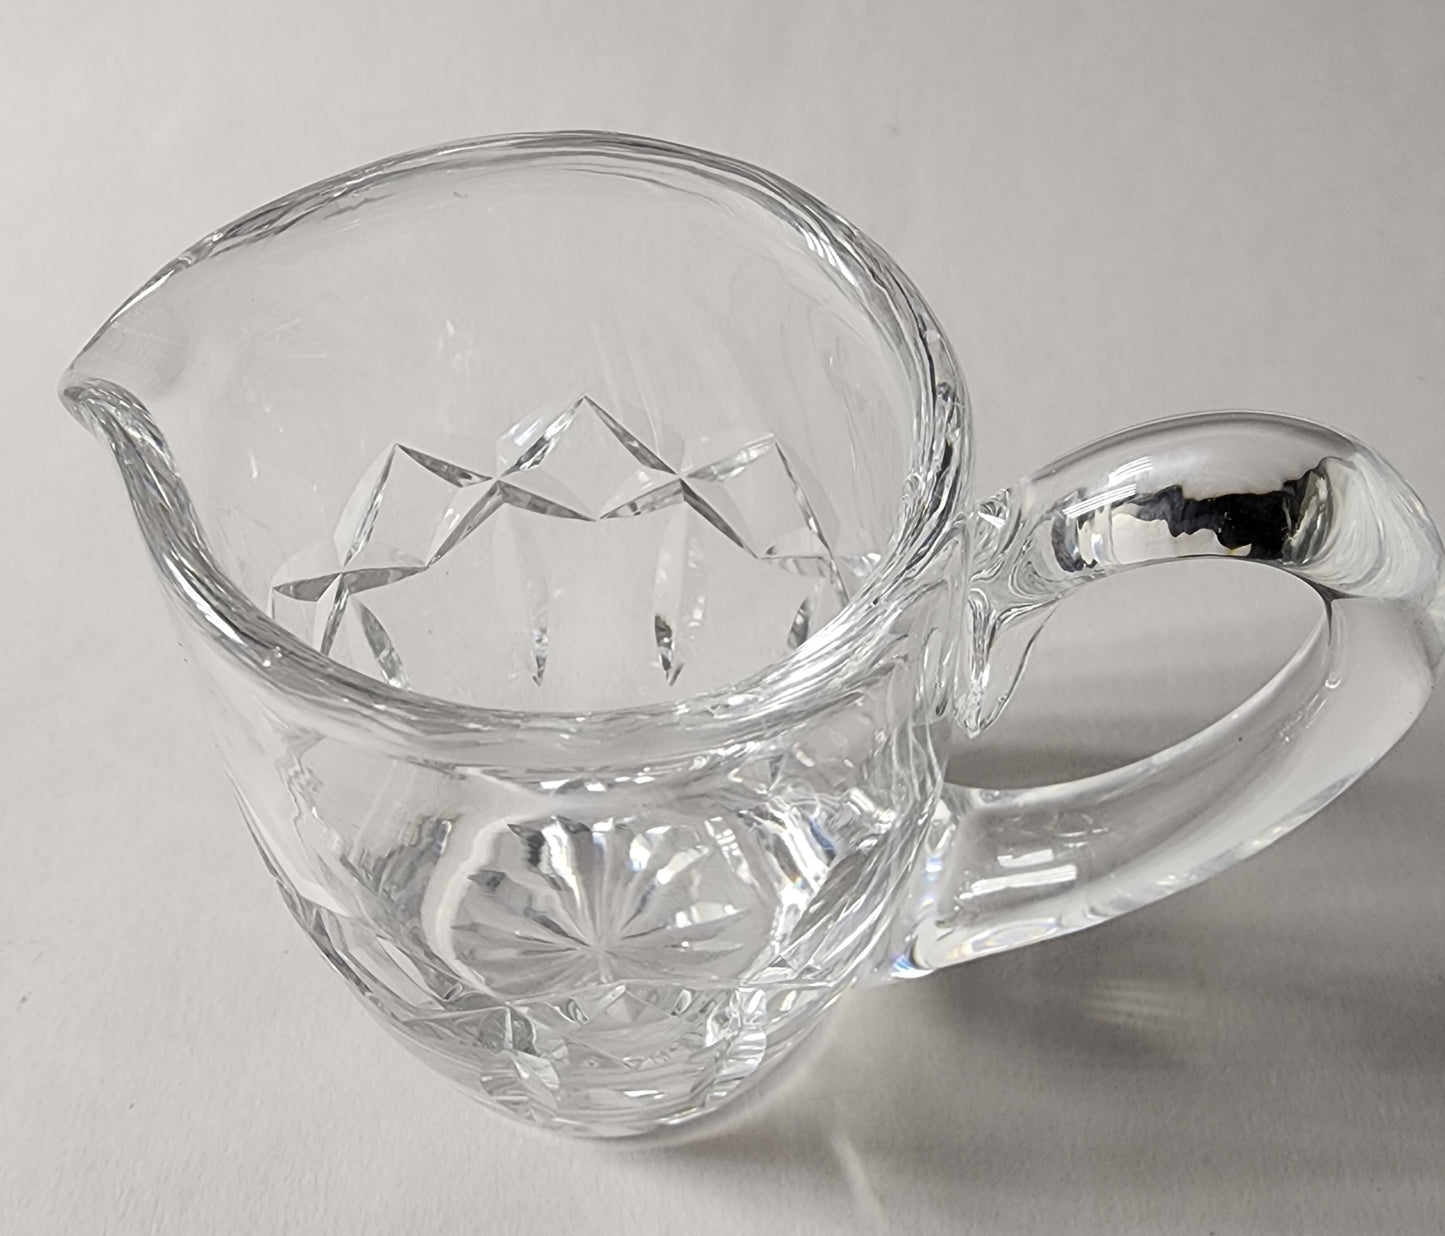 Signed Waterford crystal creamer